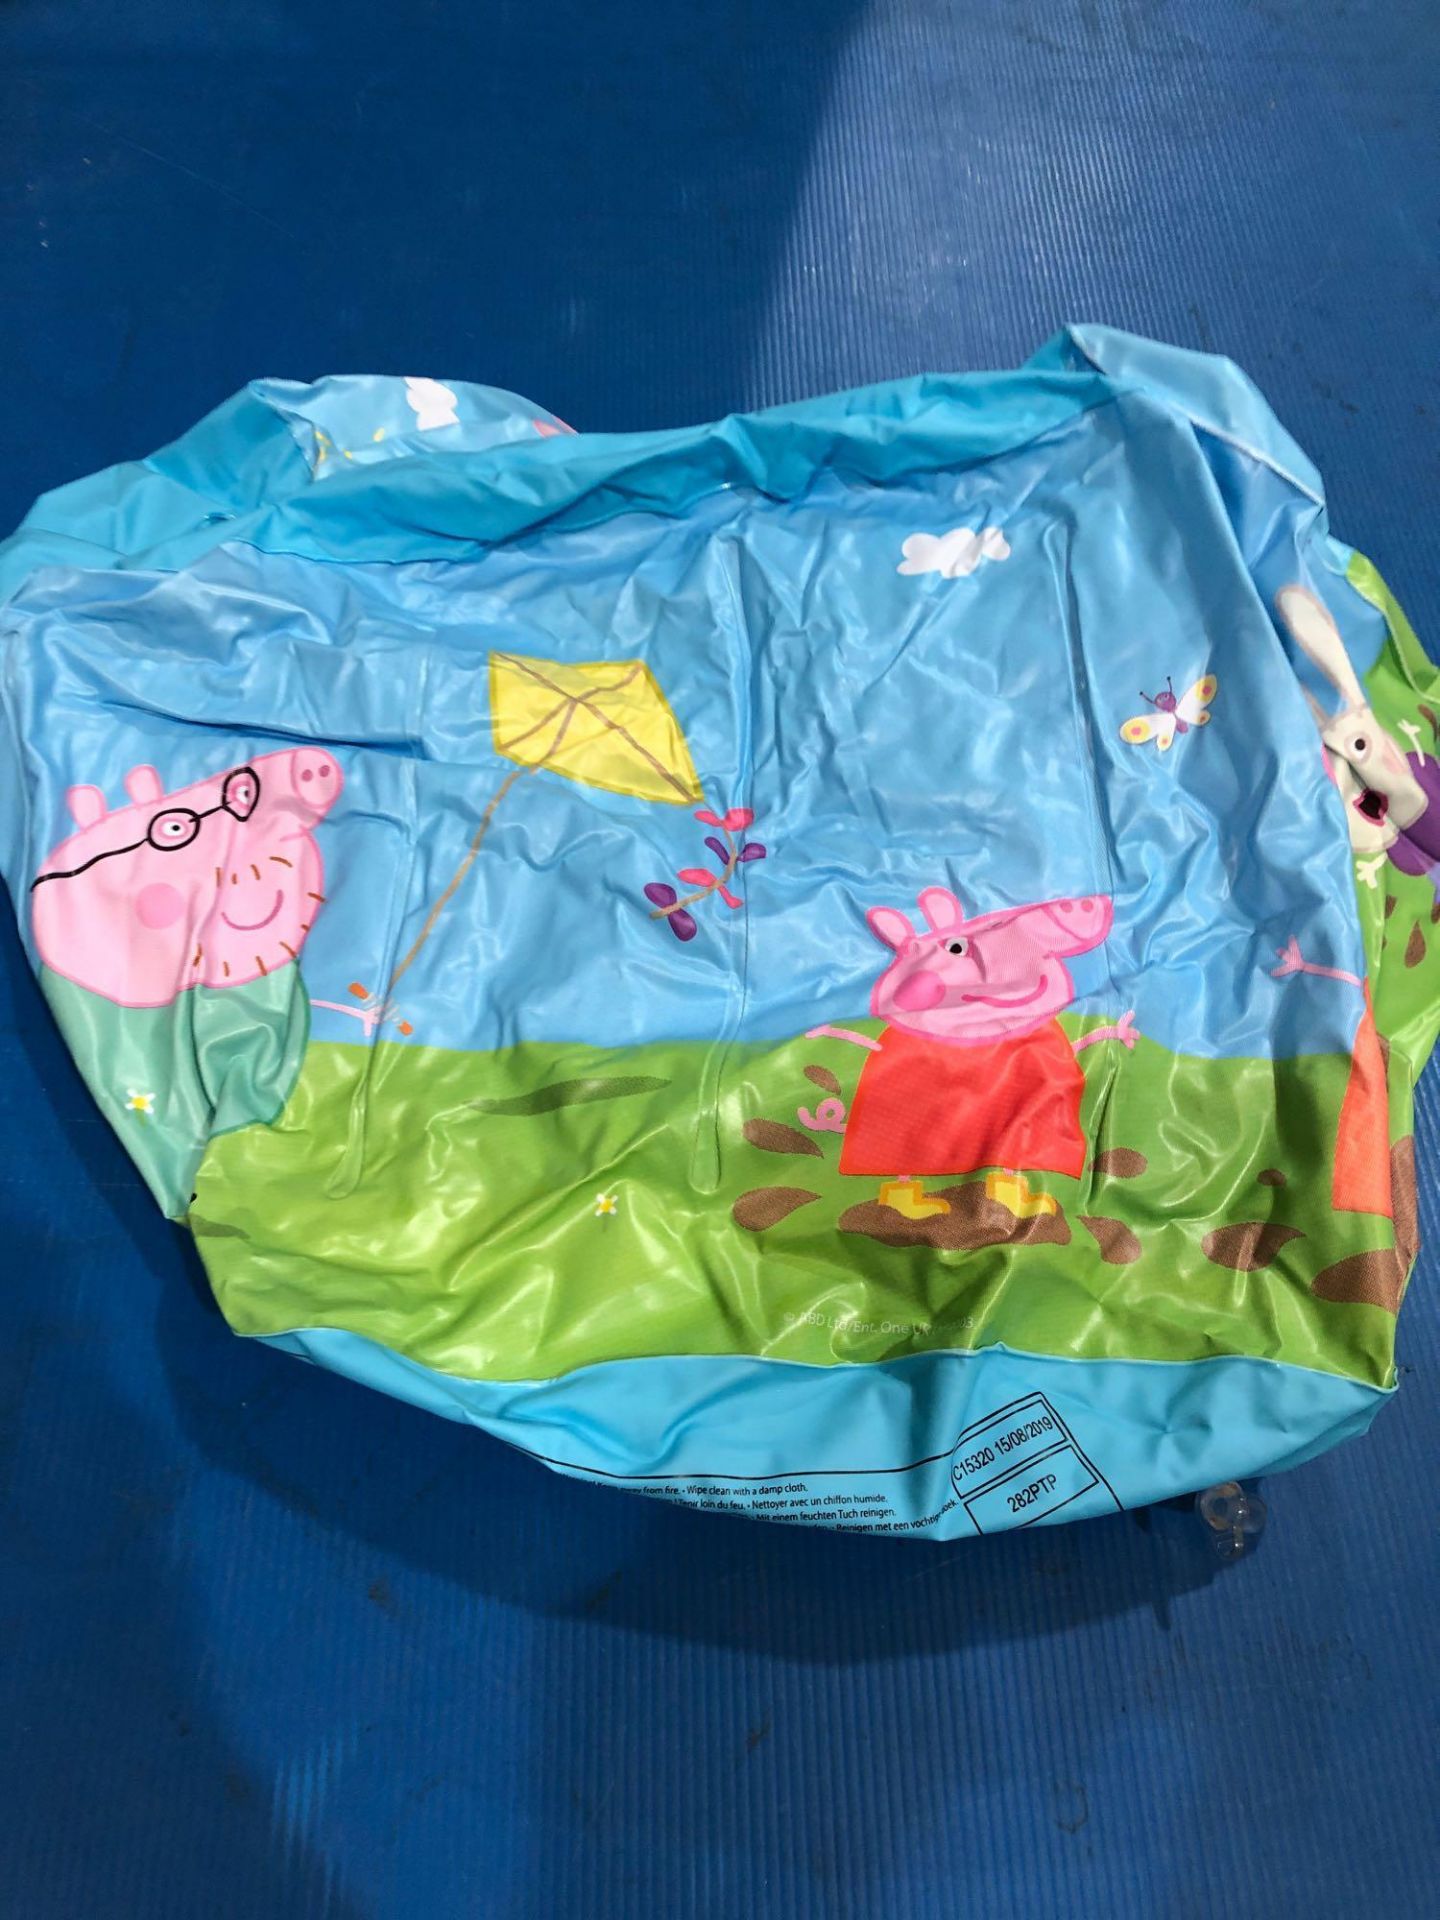 Peppa Pig Inflatable Chair - £11.00 RRP - Image 3 of 6